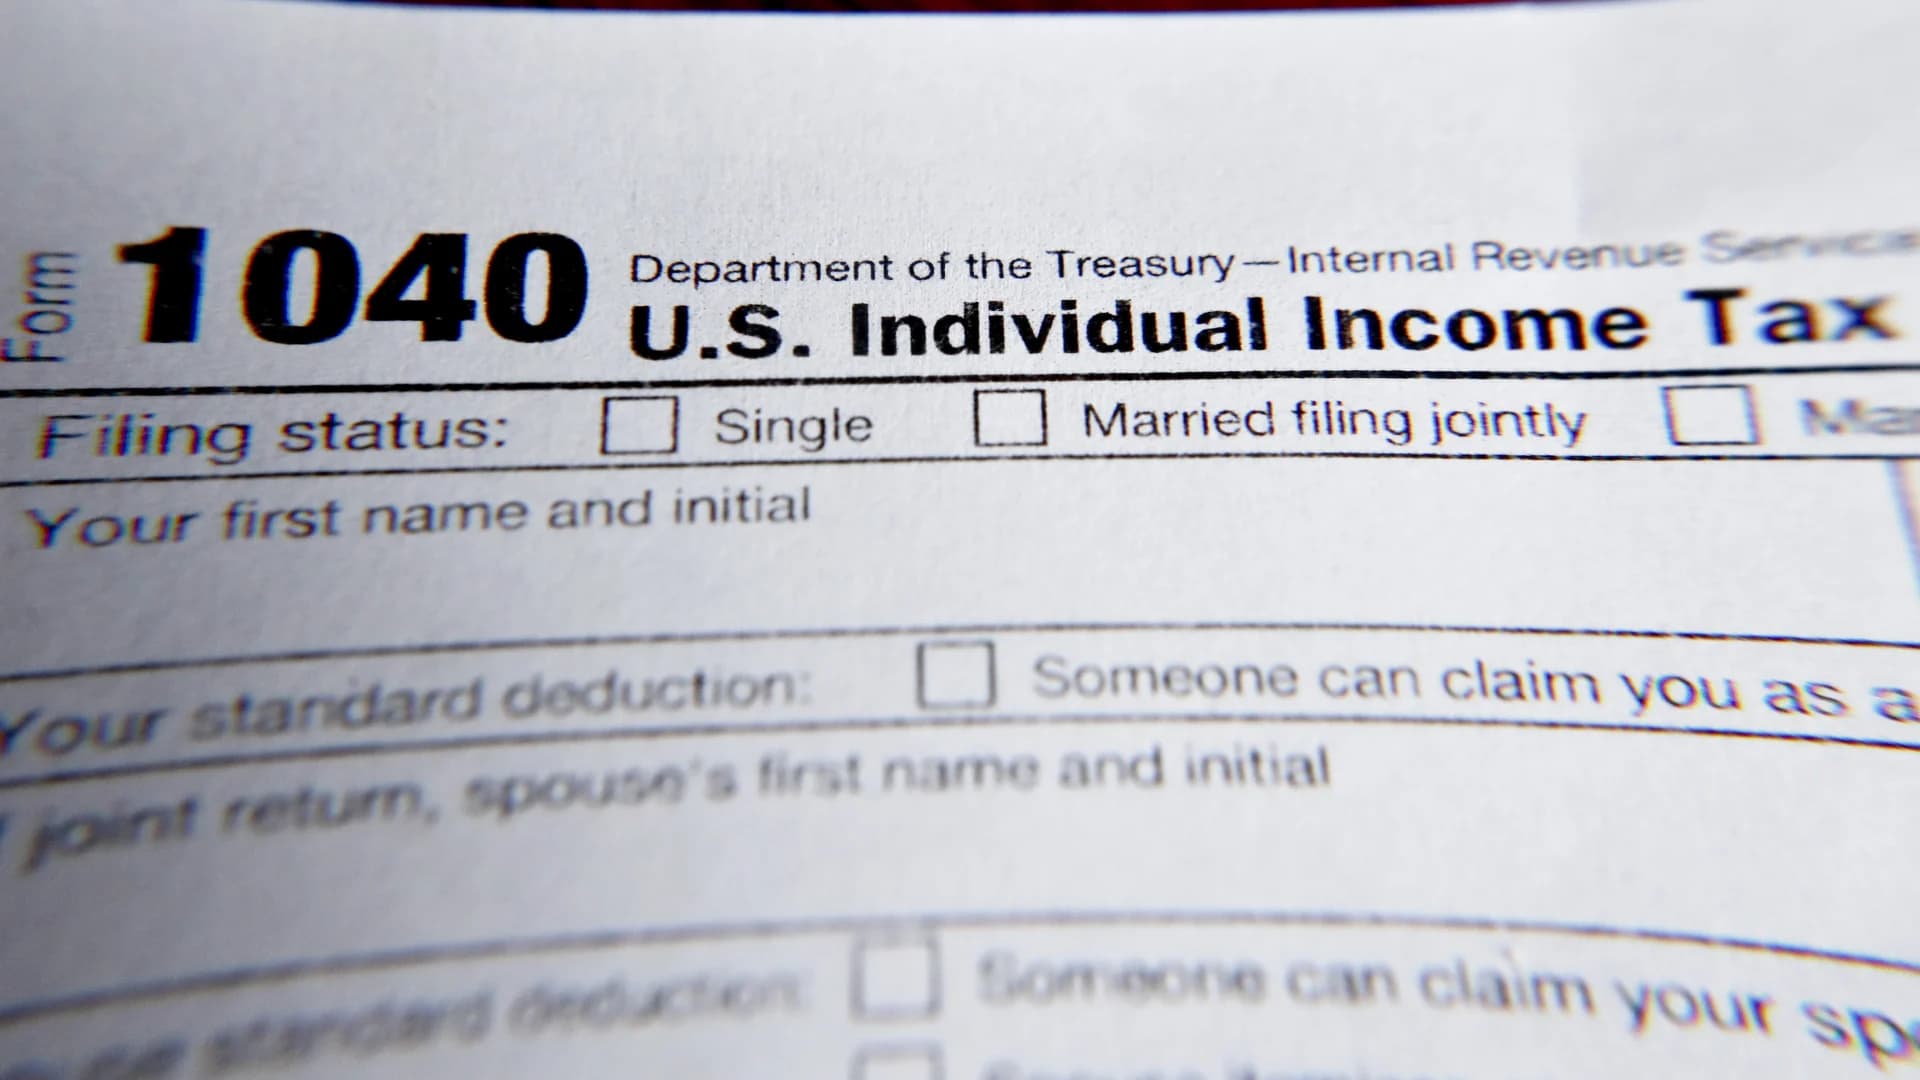 If your life changed in 2021, watch for income tax surprises